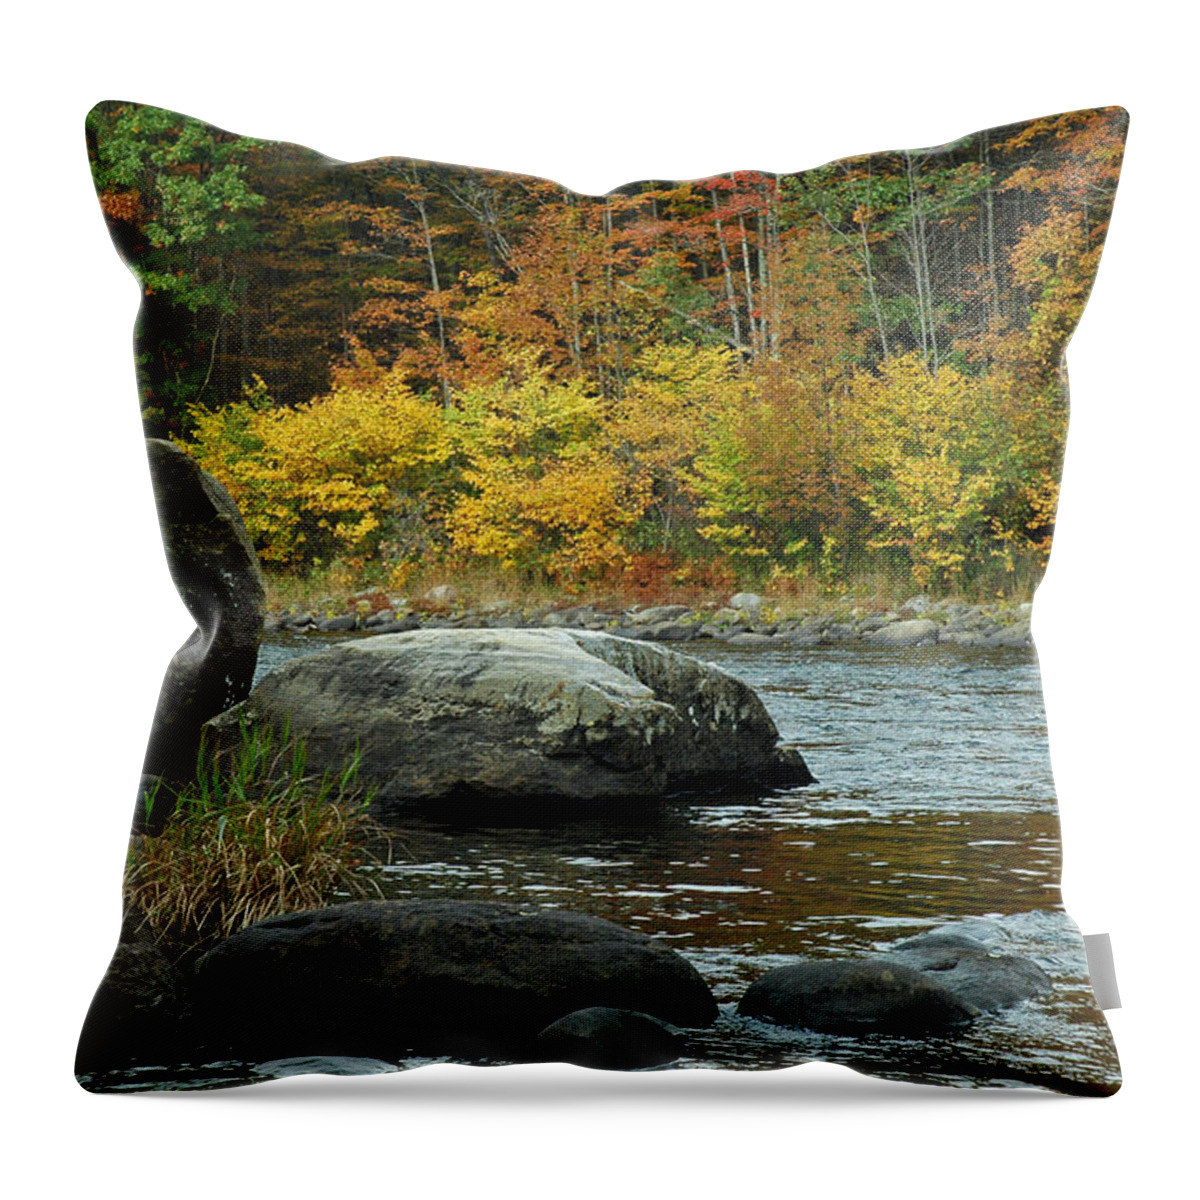 New York Throw Pillow featuring the photograph Autumn River Boulders in Upstate New York by Bruce Gourley